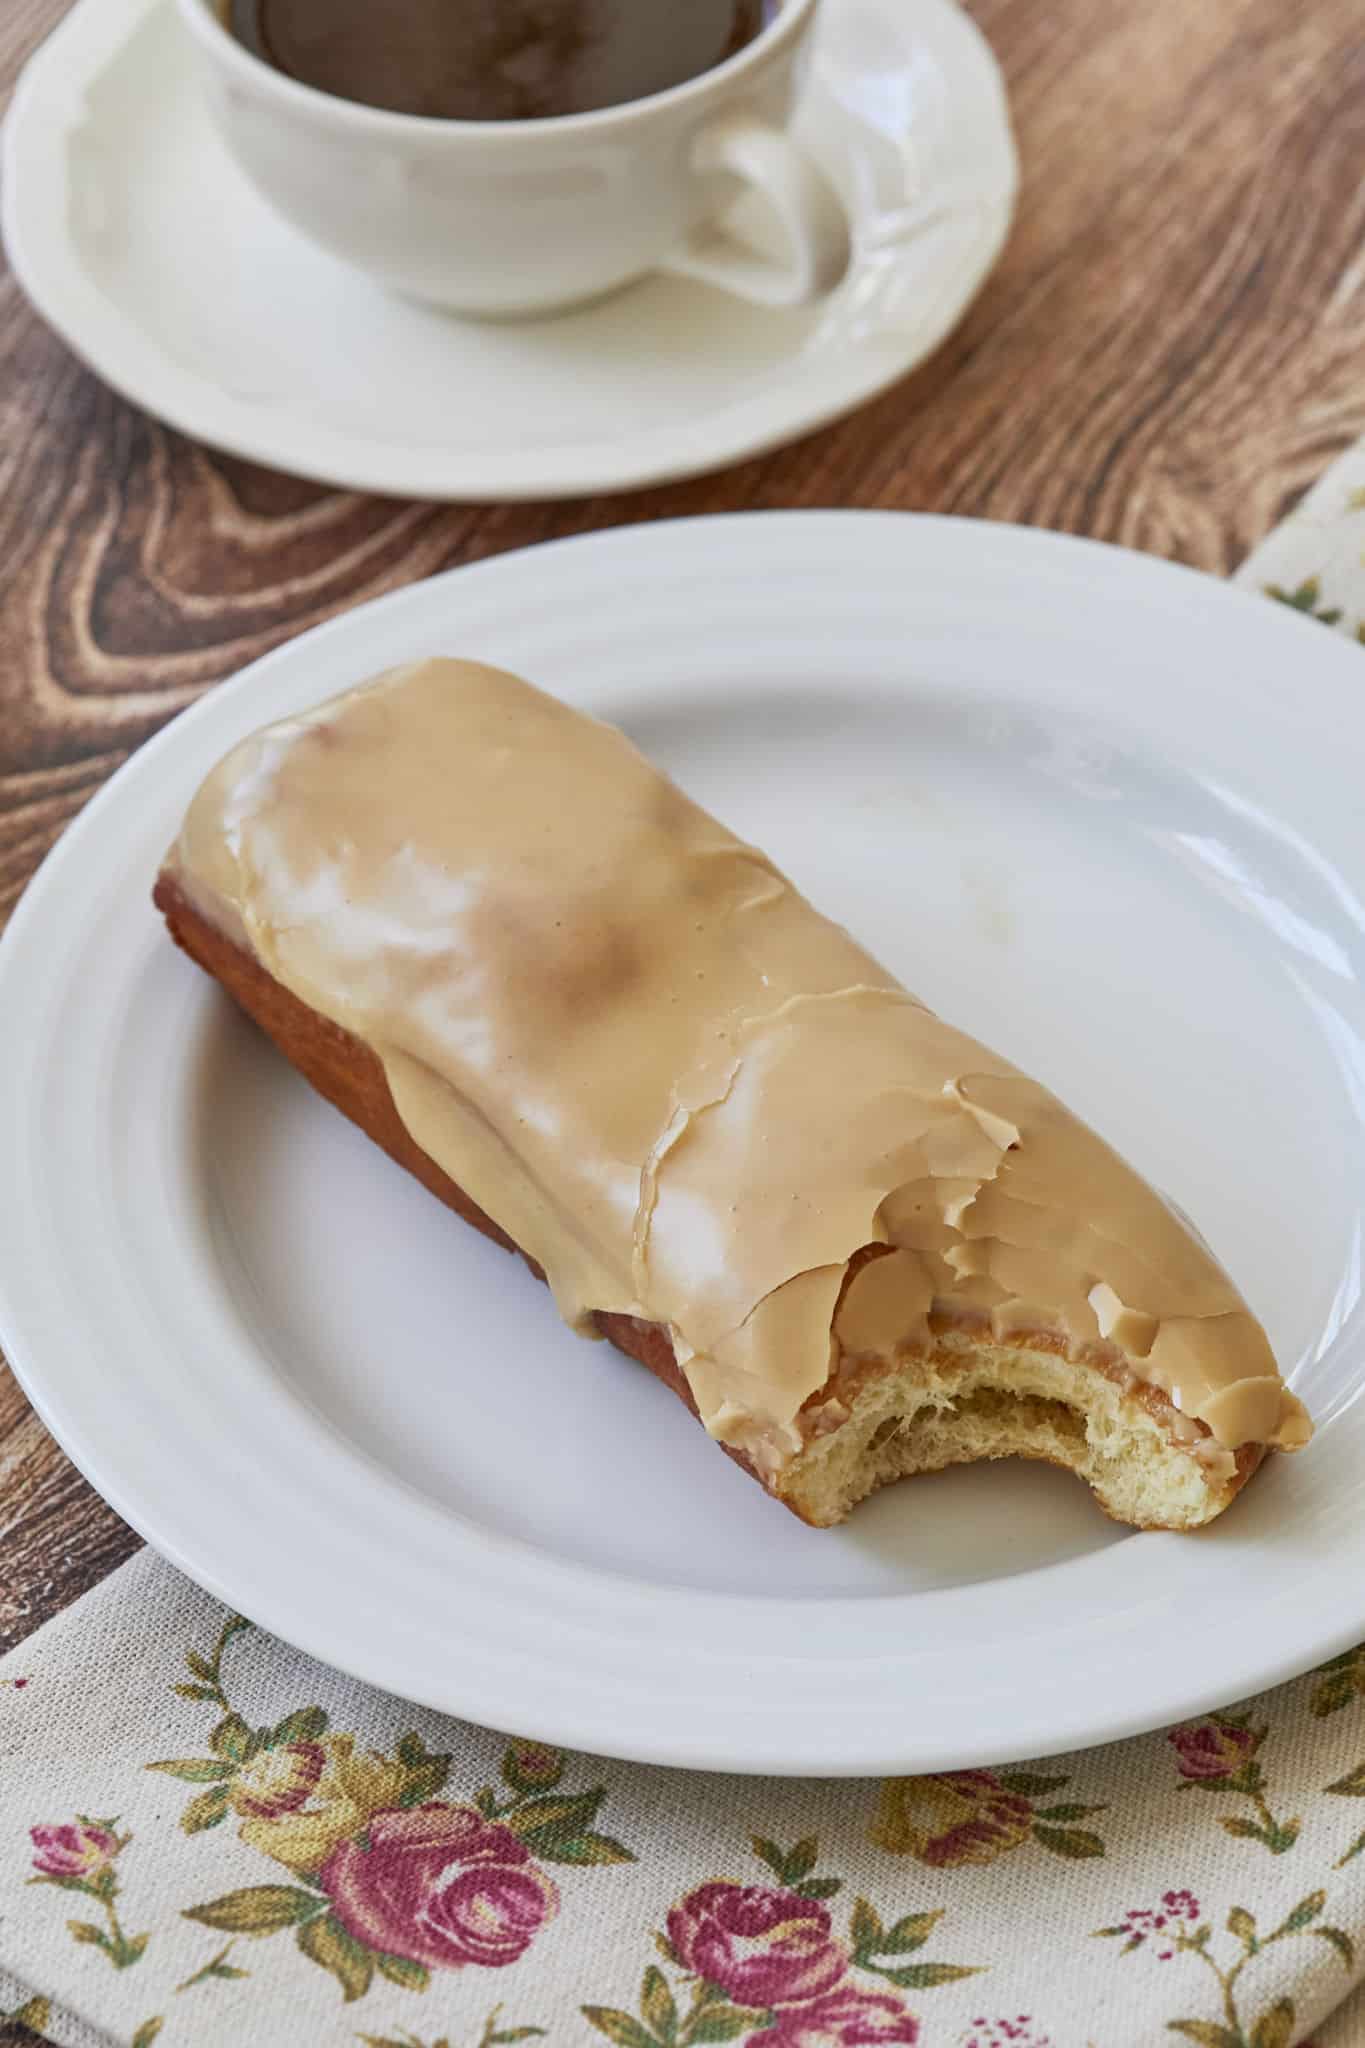 A bite is taken out of the long, log-shaped donut with maple glaze.